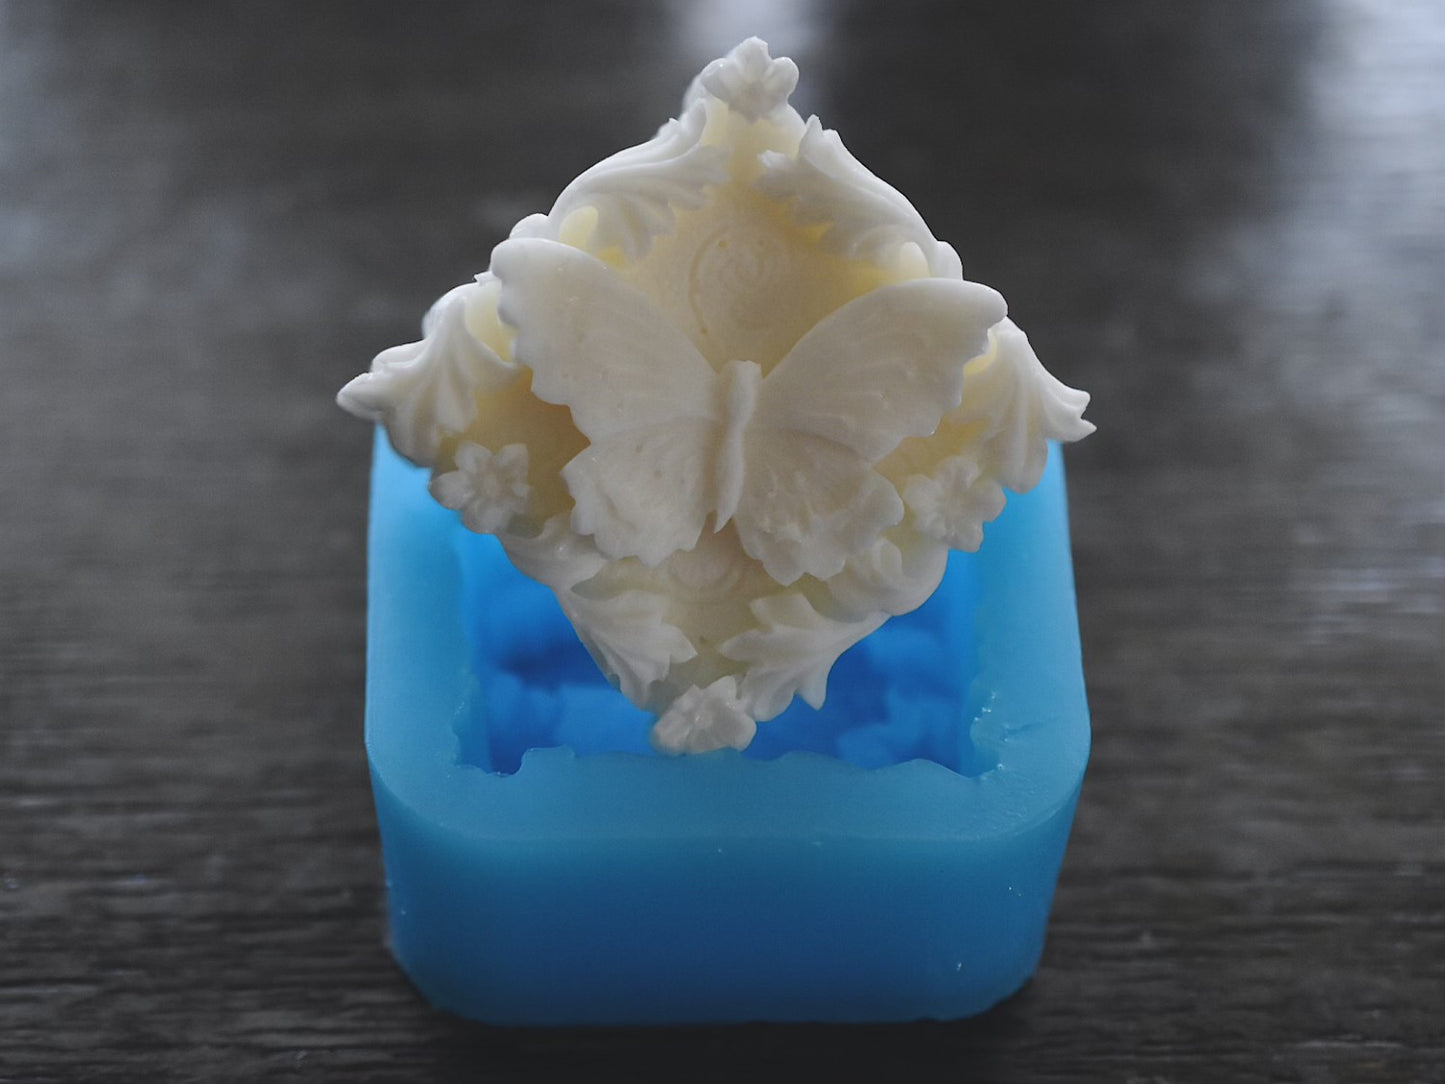 A square bar of soap with a flower and butterfly design sits on top of the butterfly mold on a wooden surface. The soap bar is white. The mold is blue.